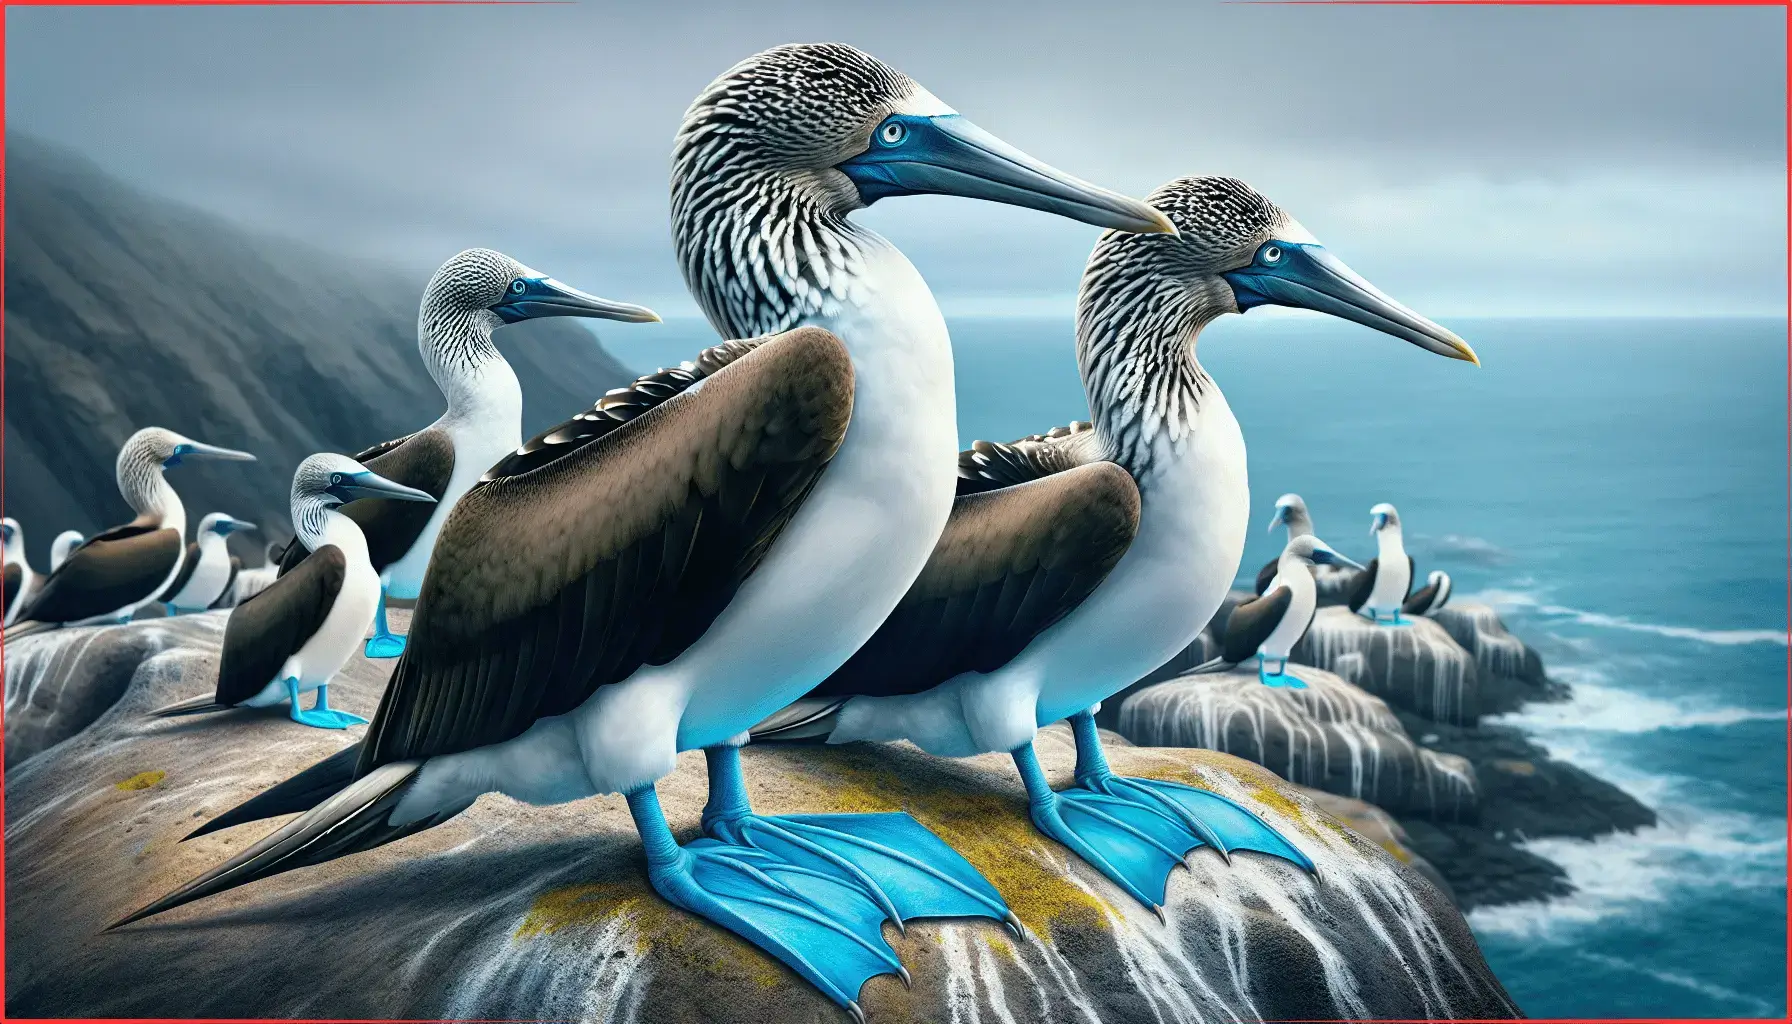 Discover the fascinating courtship rituals of the Blue Footed Boobie birds, a unique species known for their captivating biology and behaviors.